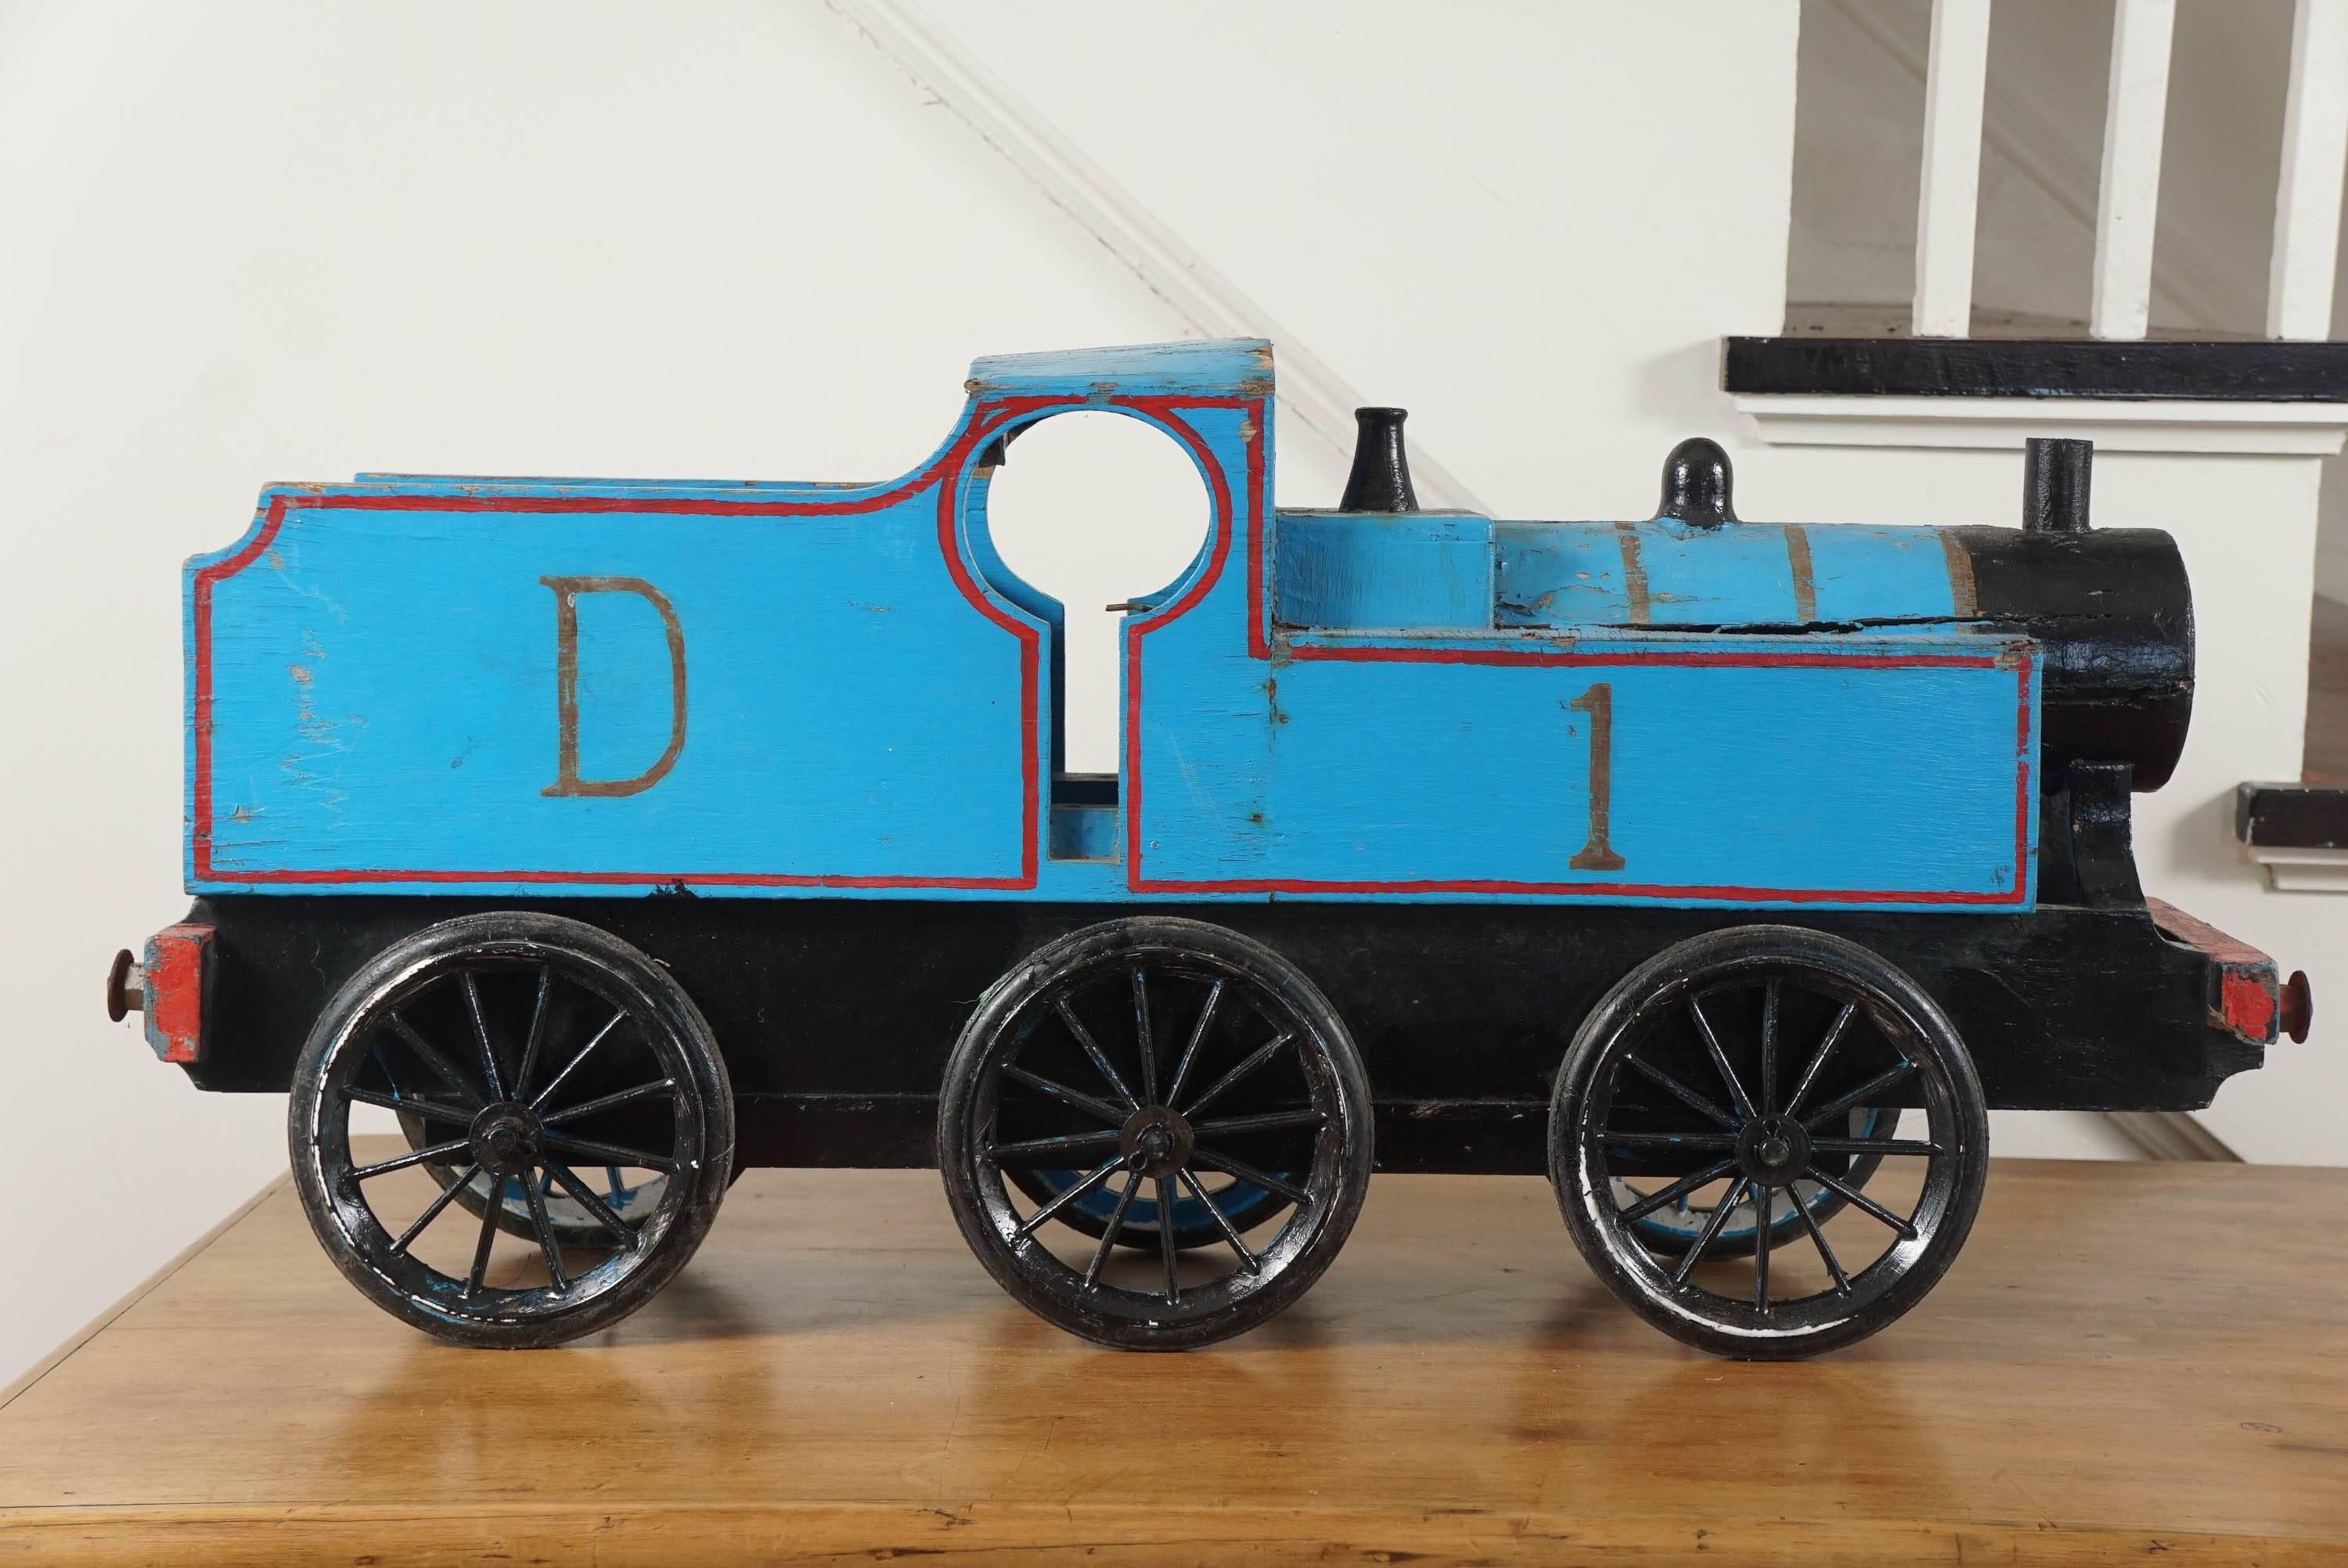 This is part of a much larger collection of children's toys at painted porch. We particularly love toy trains and this blue train makes quite a statement for a country accessory. Done in blue and red with six original wheels.